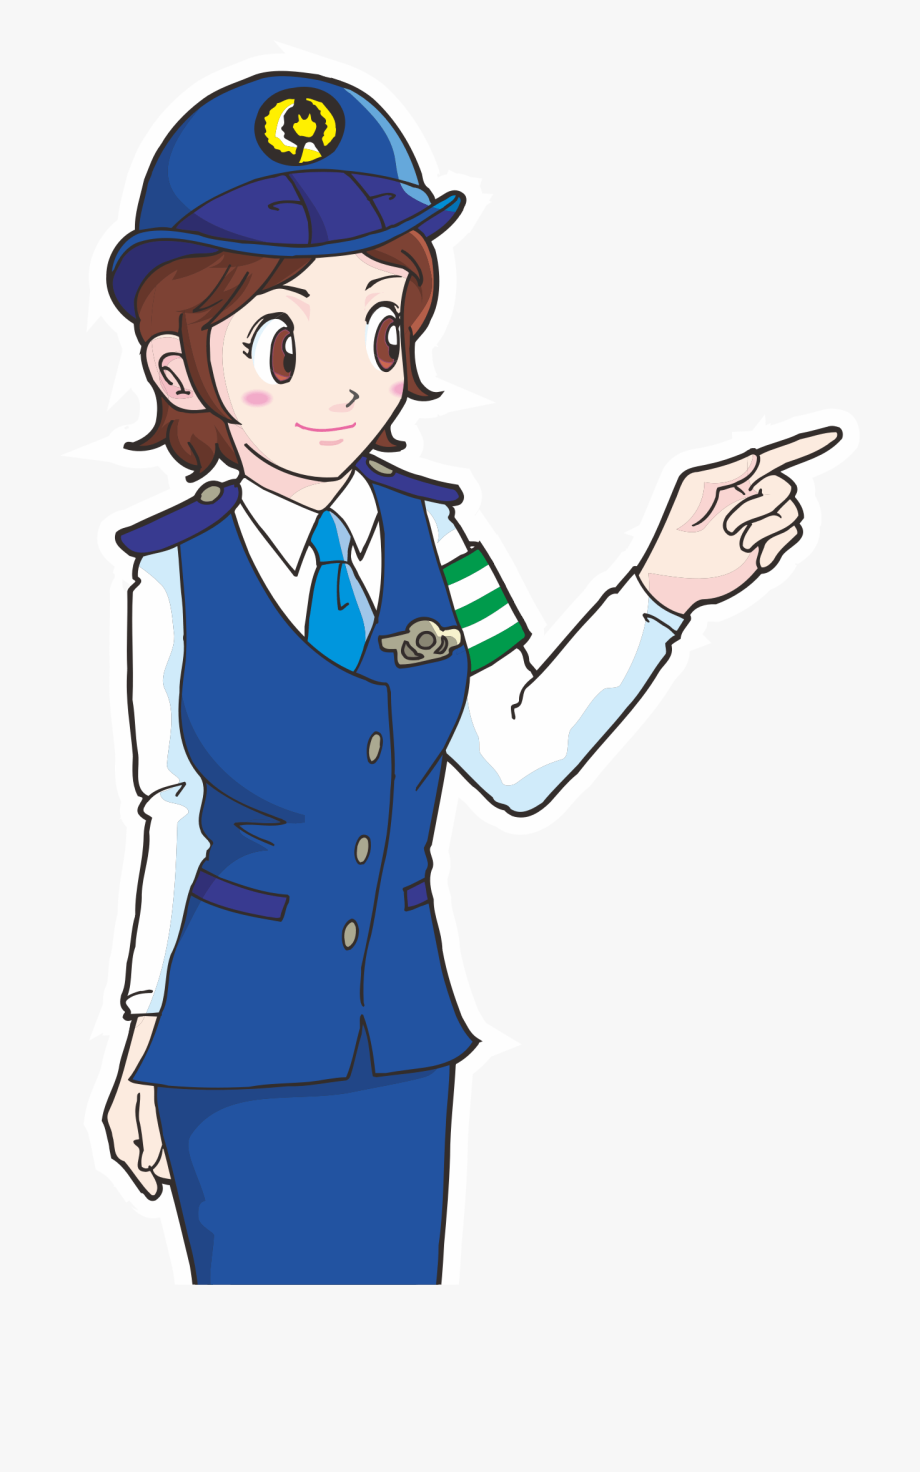 cop clipart support police